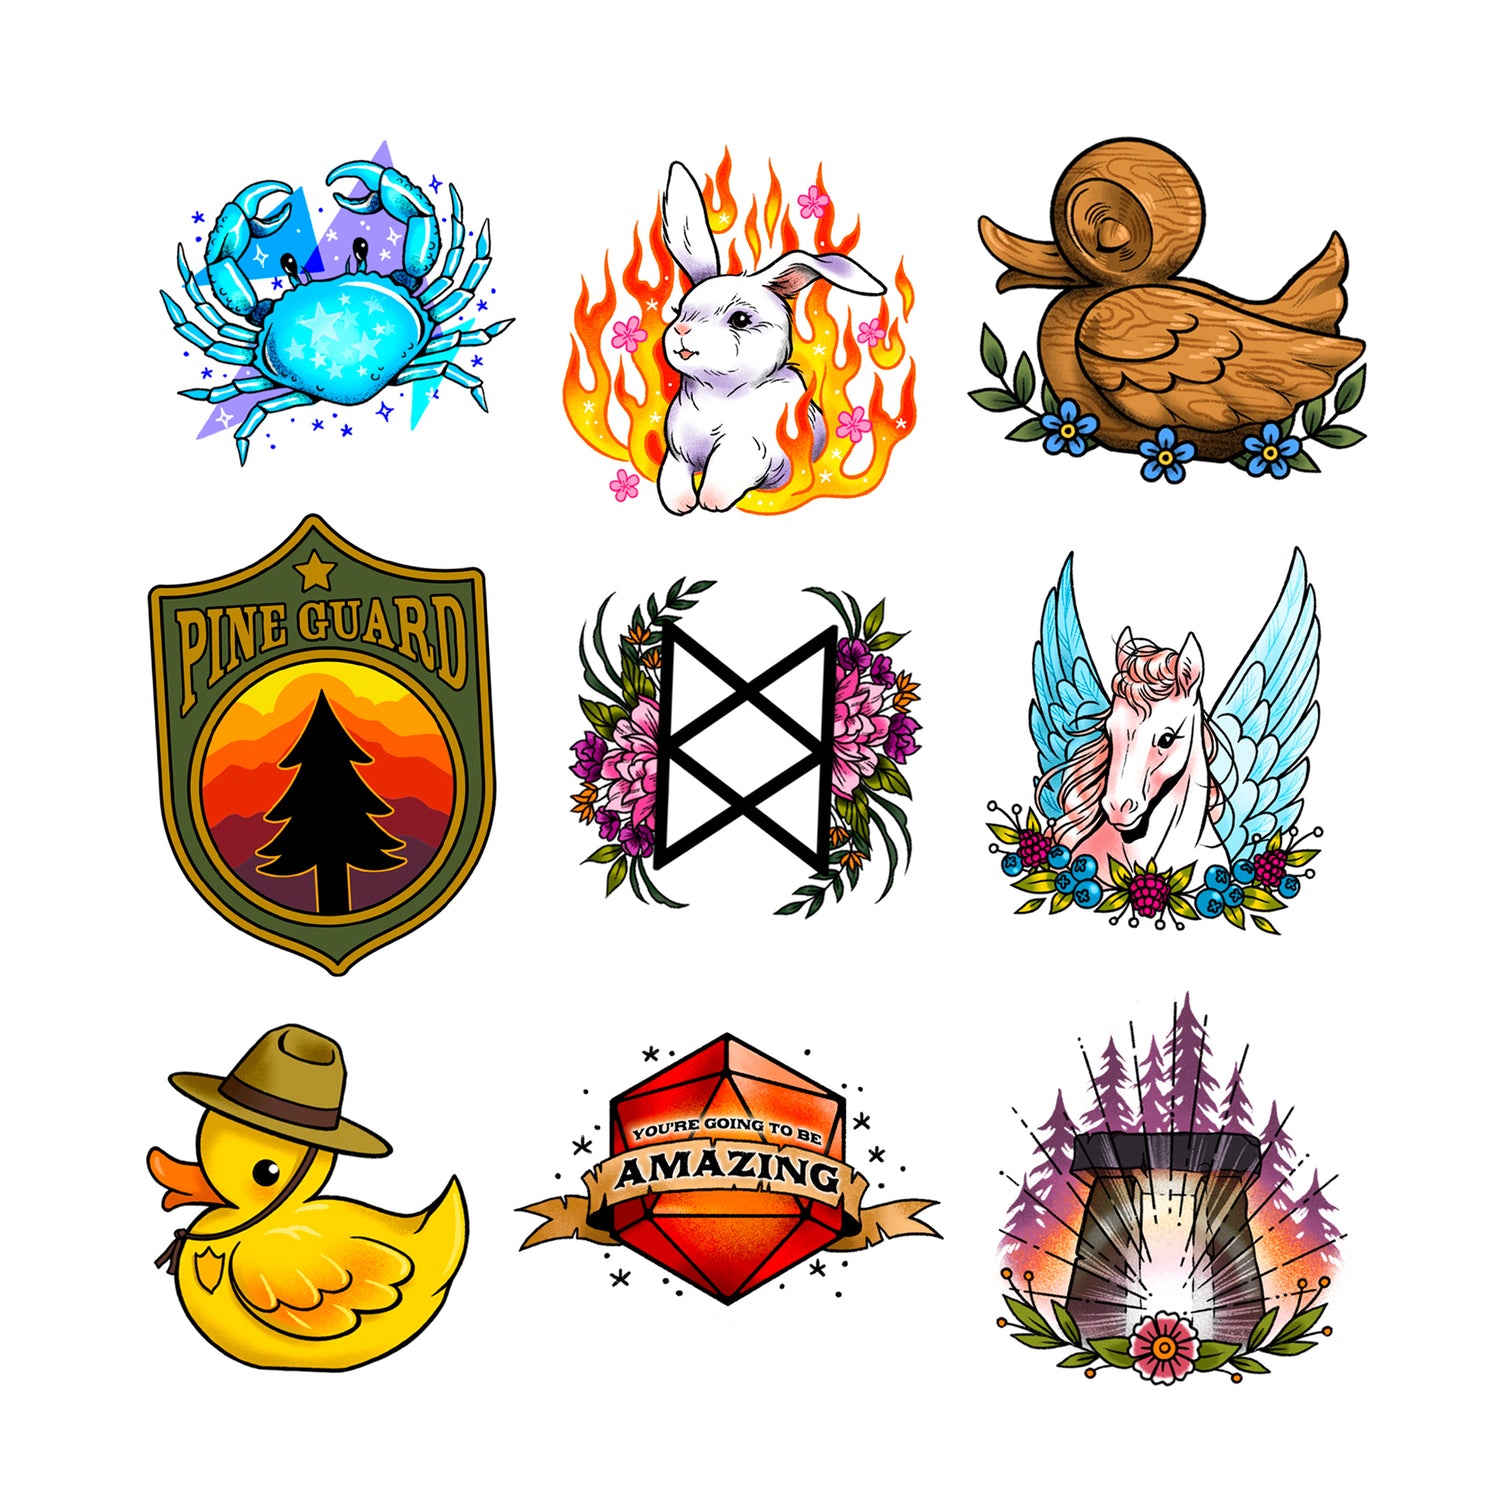 Nine temporary tattoo designs. Top row left to right: a pegasus with wings and berries; the Amnesty gate with trees and a flower; a duck wearing a ranger hat and badge. Center row left to right: A Pine Guard patch; a rabbit surrounded by flames and pink flowers; the BoB sigil with pink flowers and leaves around it. Bottom row left to right: a wooden duck with flowers and leaves; a d20 with a banner that says, “You’re going to be AMAZING.”; a blue crab with stars on its back. 